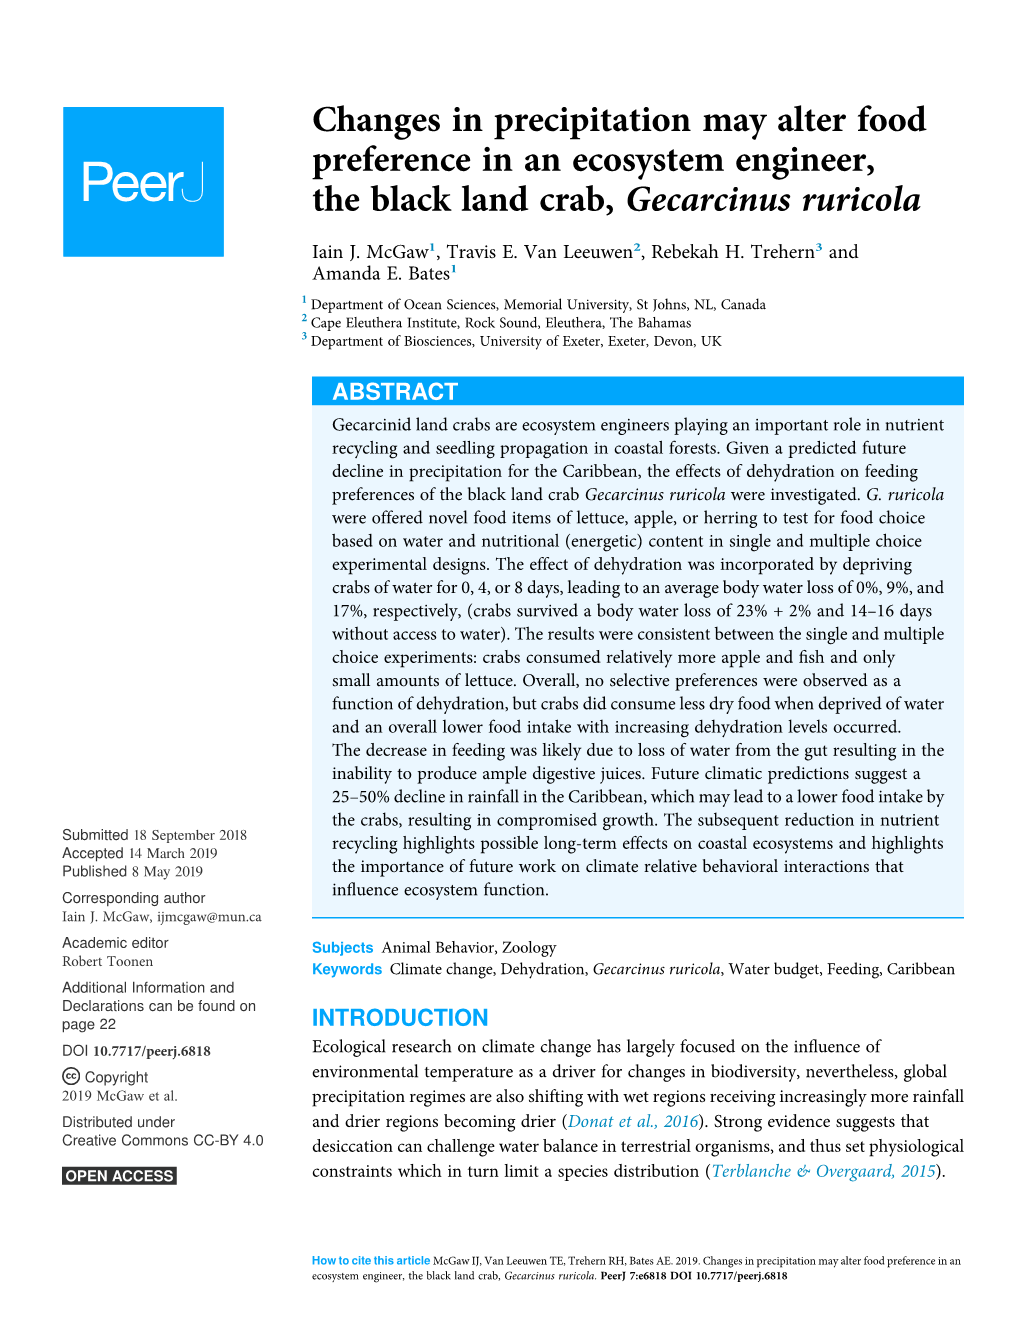 Changes in Precipitation May Alter Food Preference in an Ecosystem Engineer, the Black Land Crab, Gecarcinus Ruricola